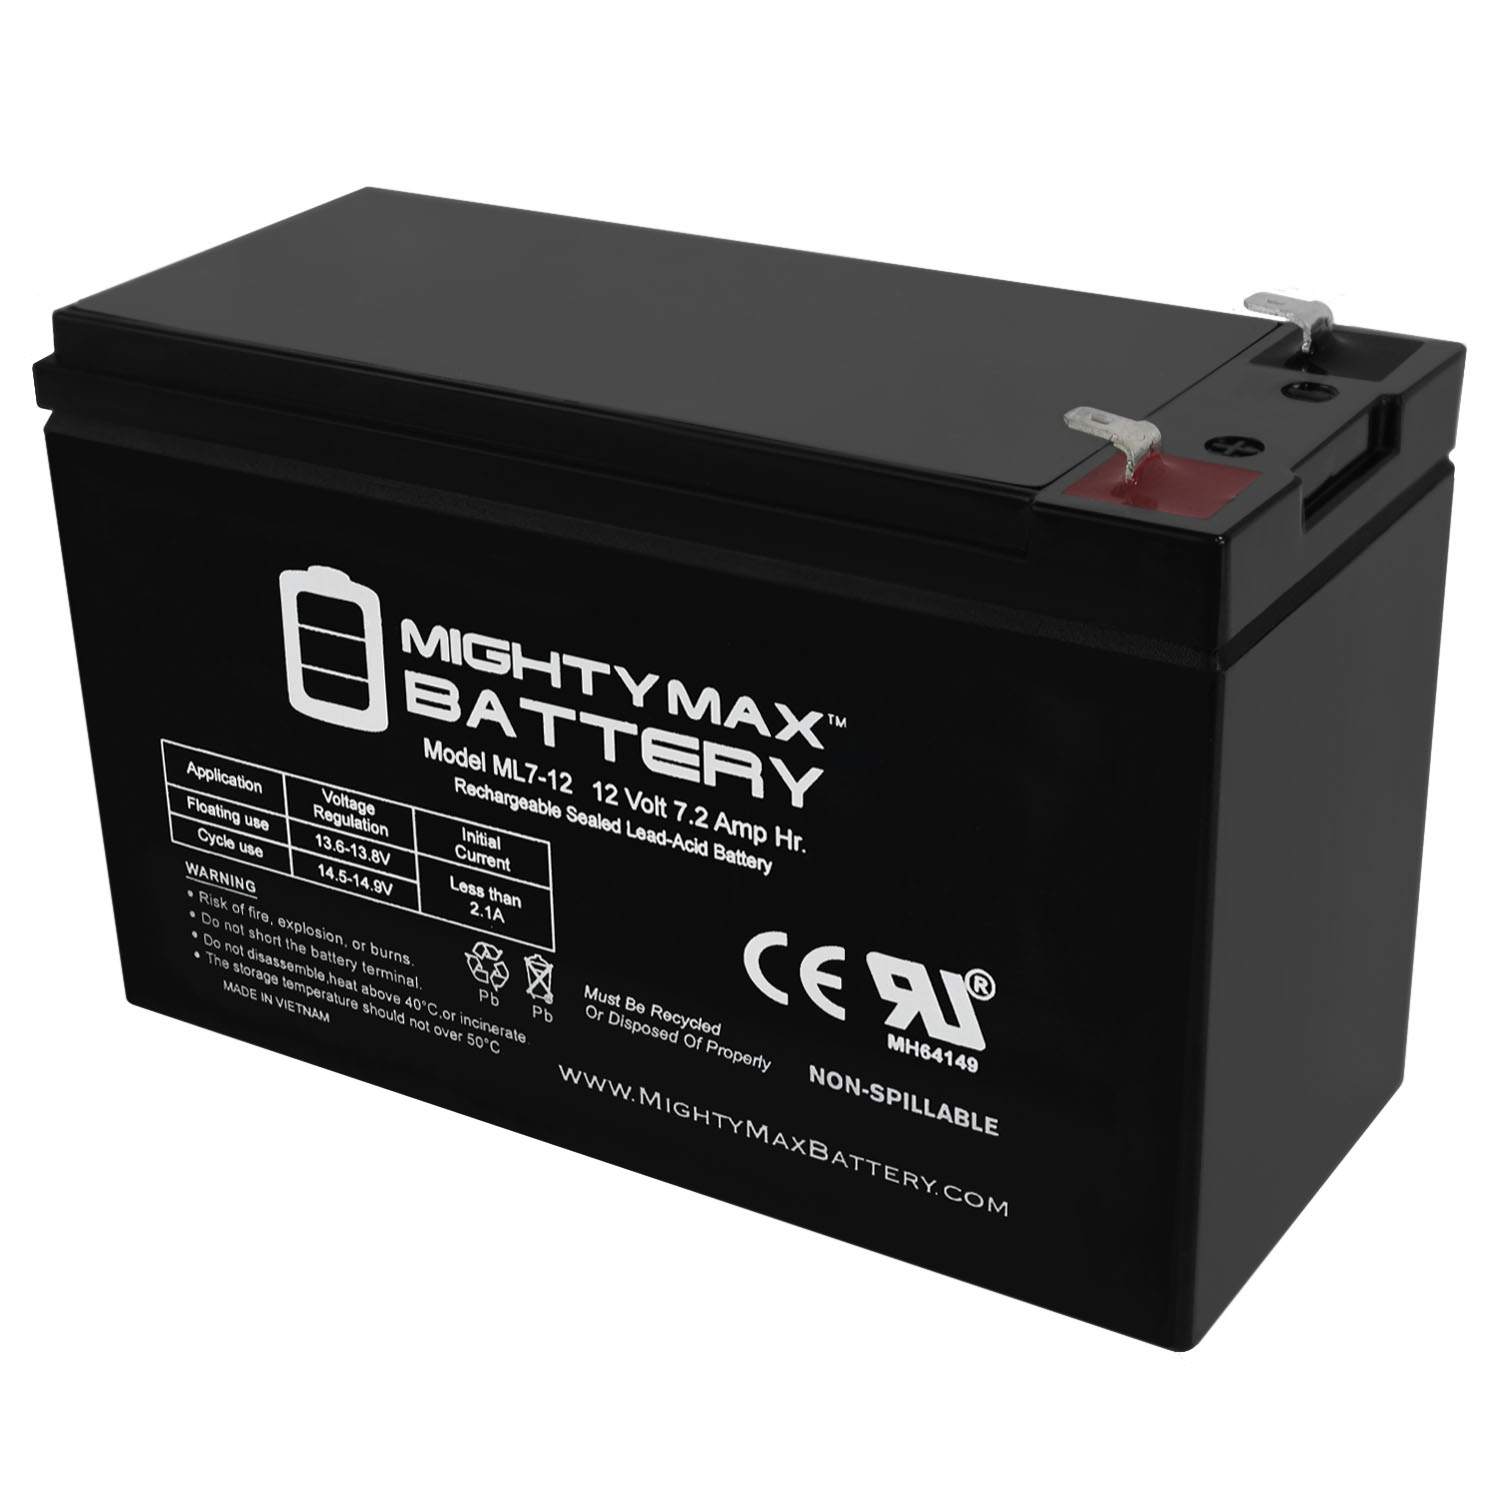 Mighty Max 12V 7Ah Battery Replacement for Home ADT Security